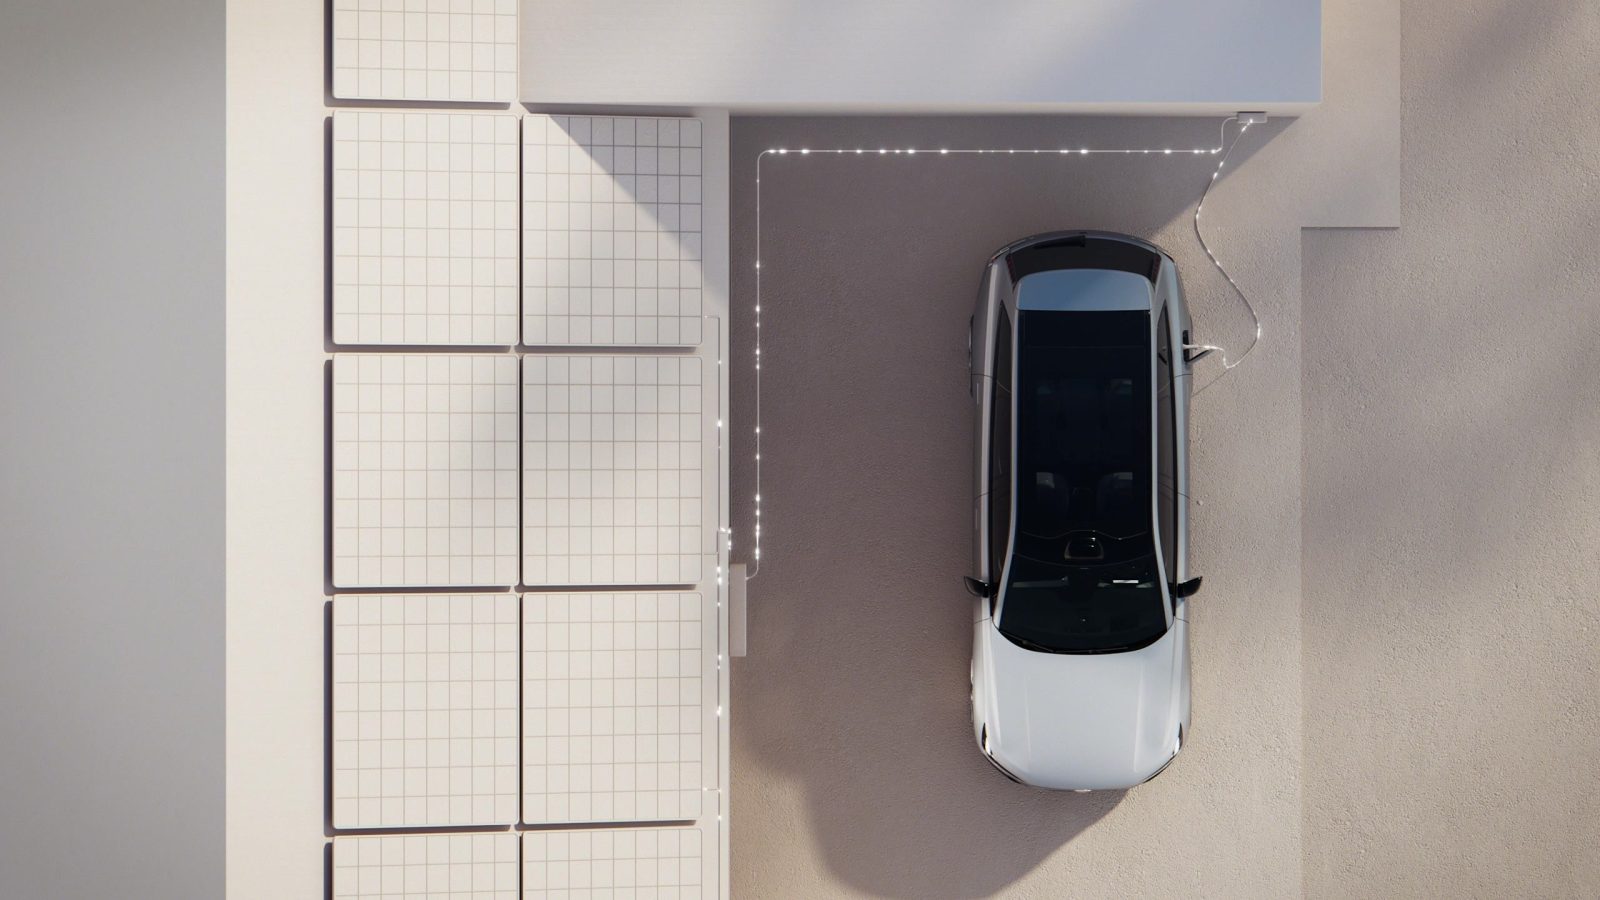 volvo launches new business unit to promote bi-directional charging